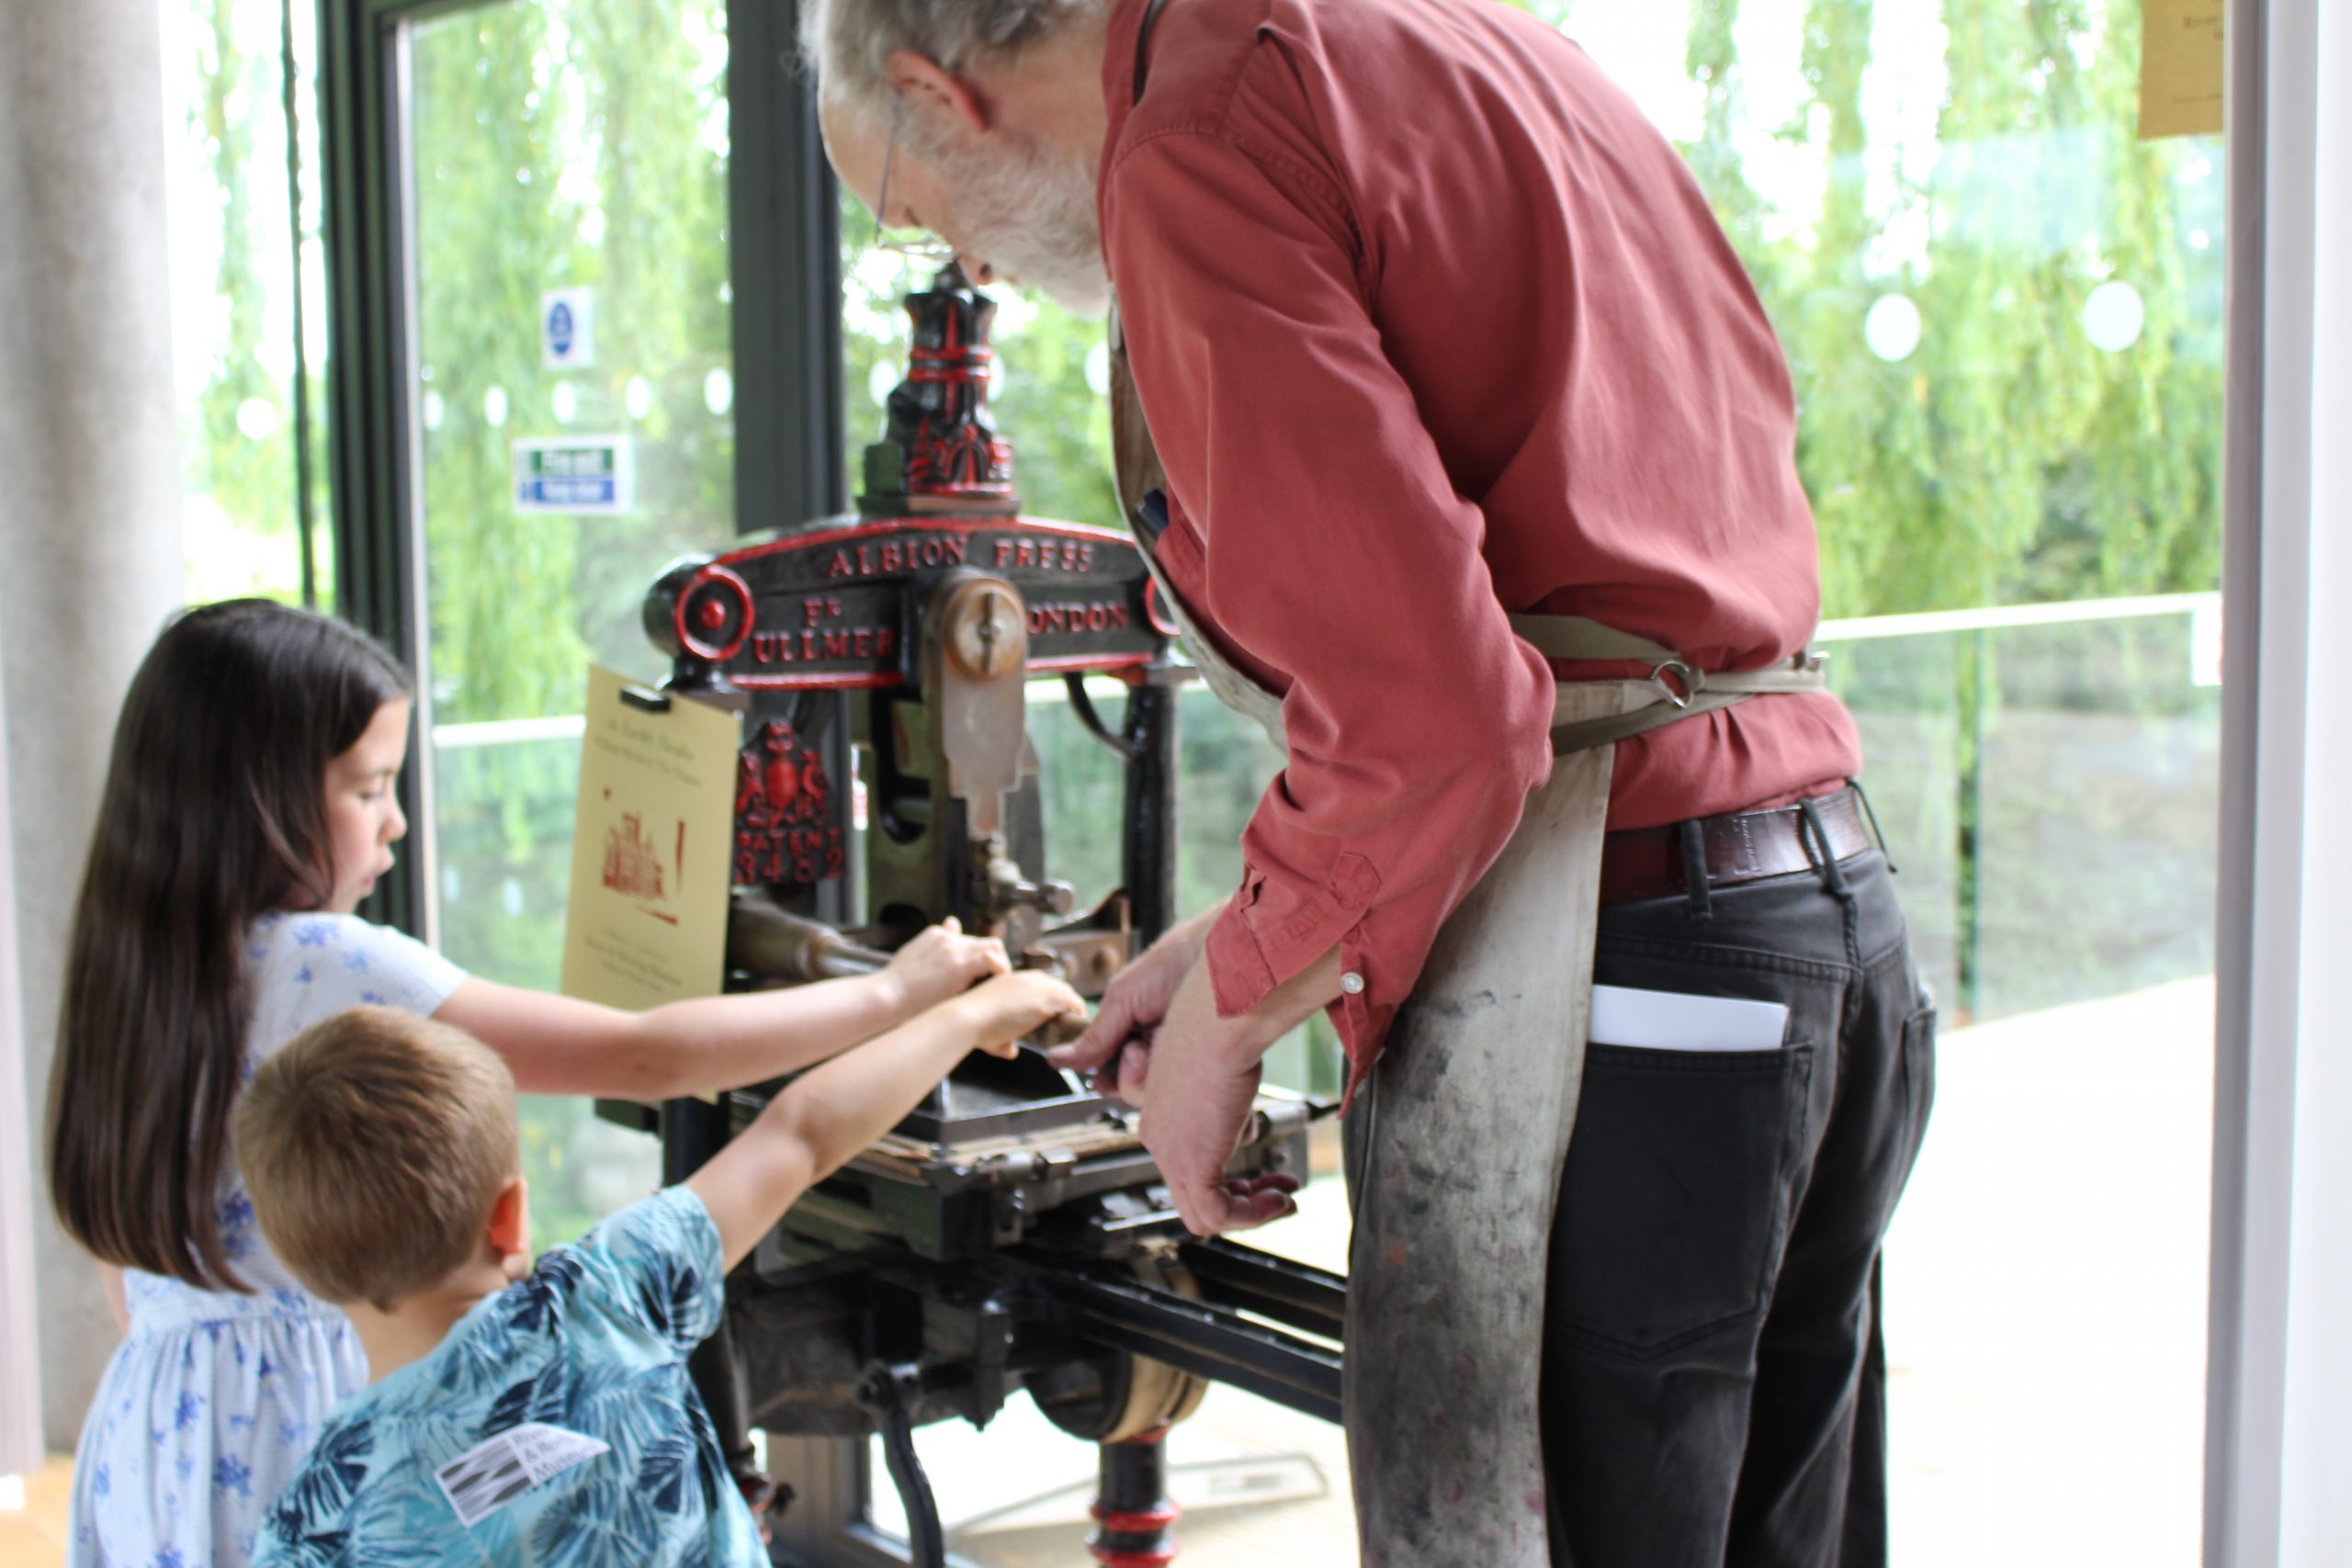 A young girl and boy together turn the handle to operate an old-fashioned printing press. They are helped by an older man wearing an ink-stained apron